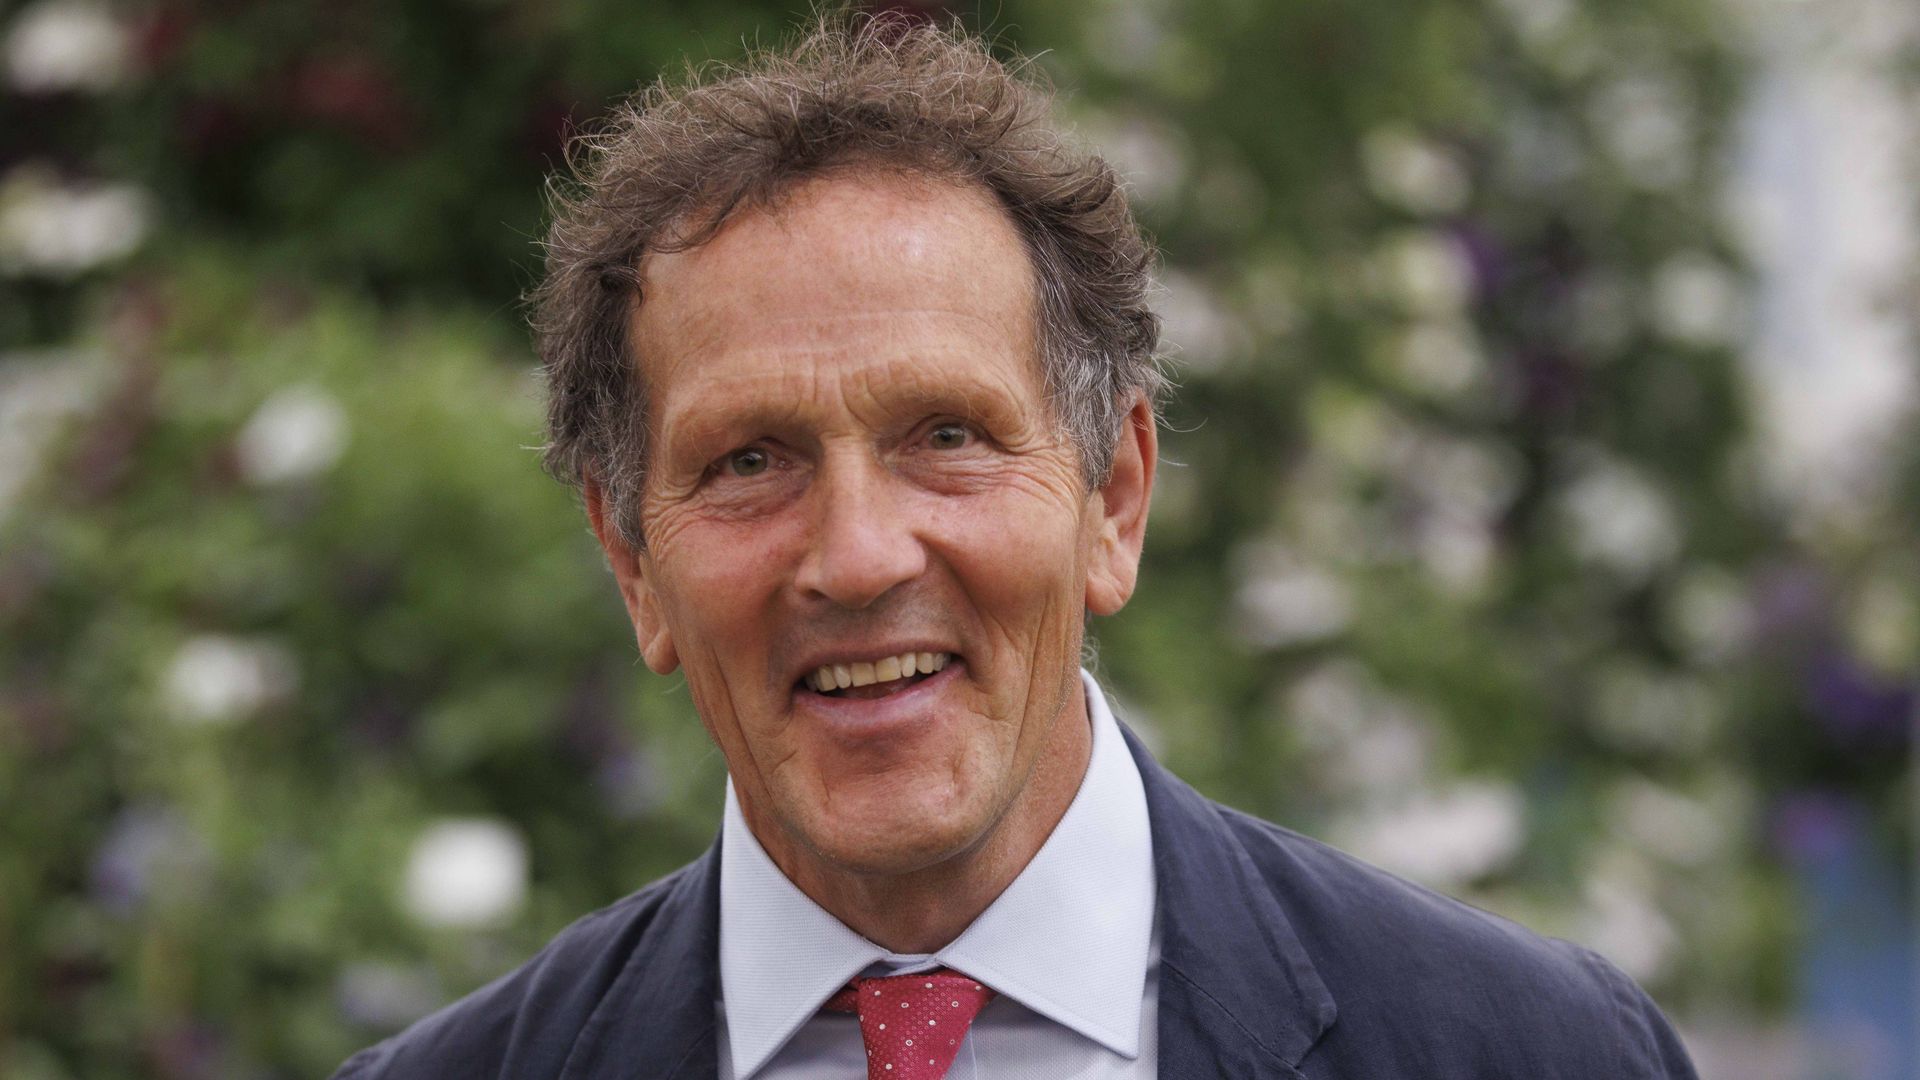 Monty Don smiles as he attends Chelsea Flower Show